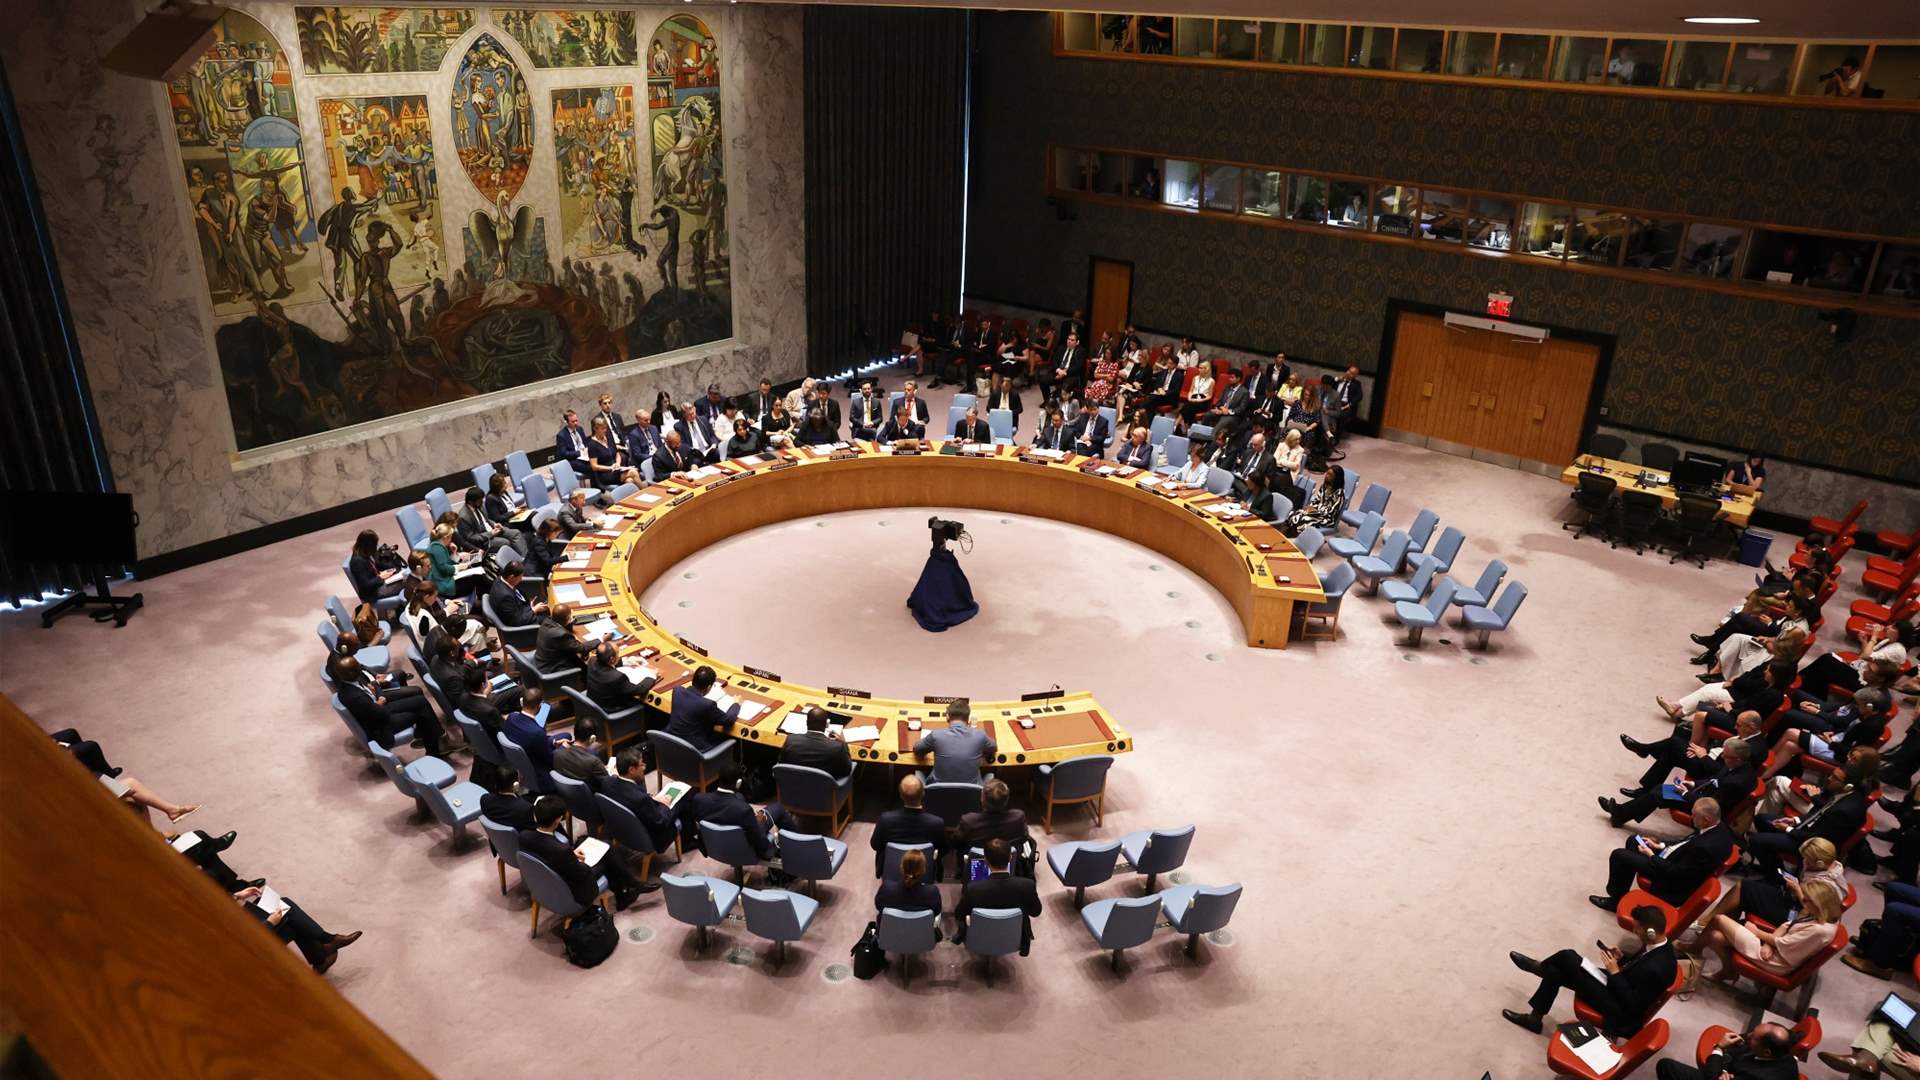 UN Resolution on ceasefire blocked: US faces opposition from Russia, China, and Algeria